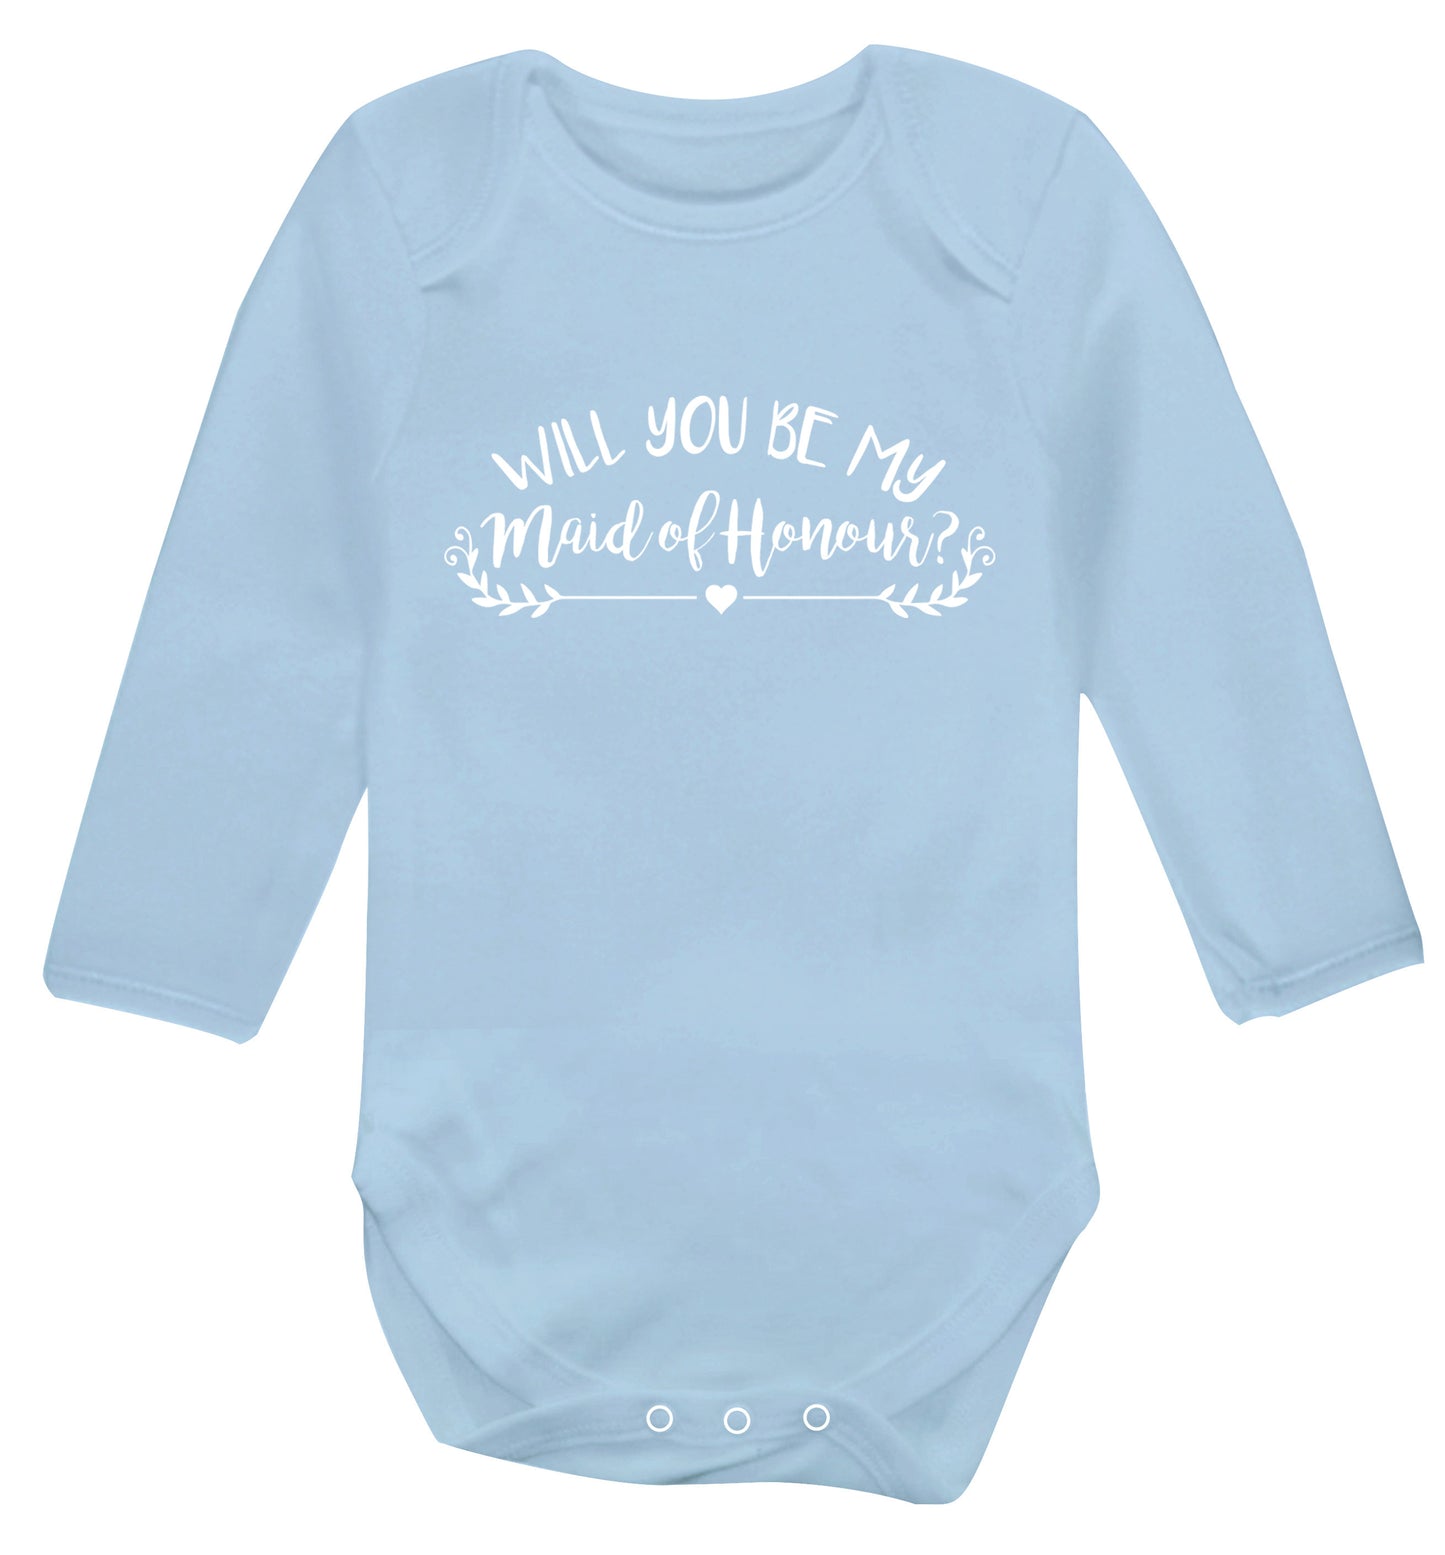 Will you be my maid of honour? Baby Vest long sleeved pale blue 6-12 months